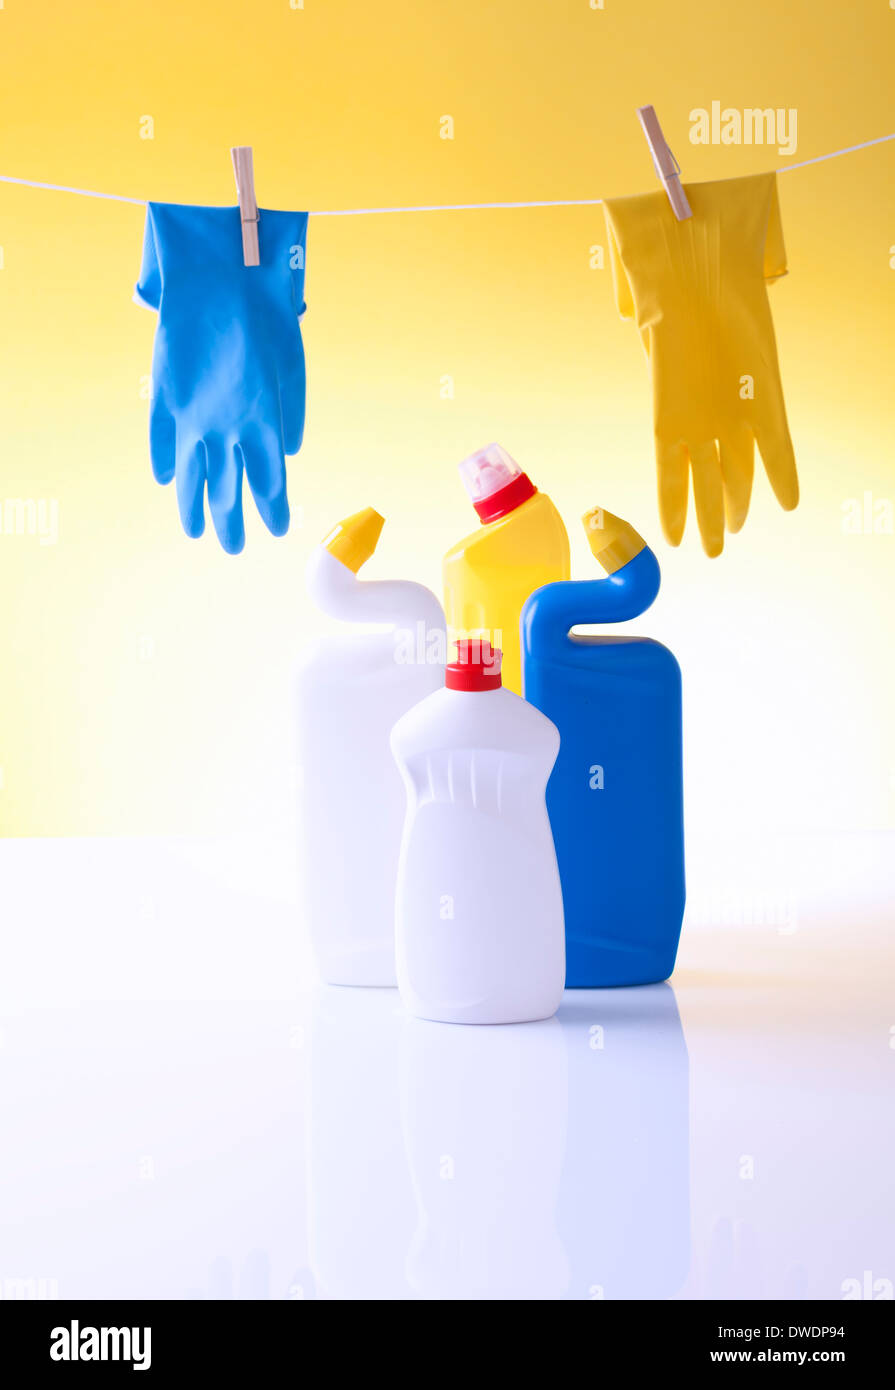 cleaning detergents and cleaning equipment Stock Photo